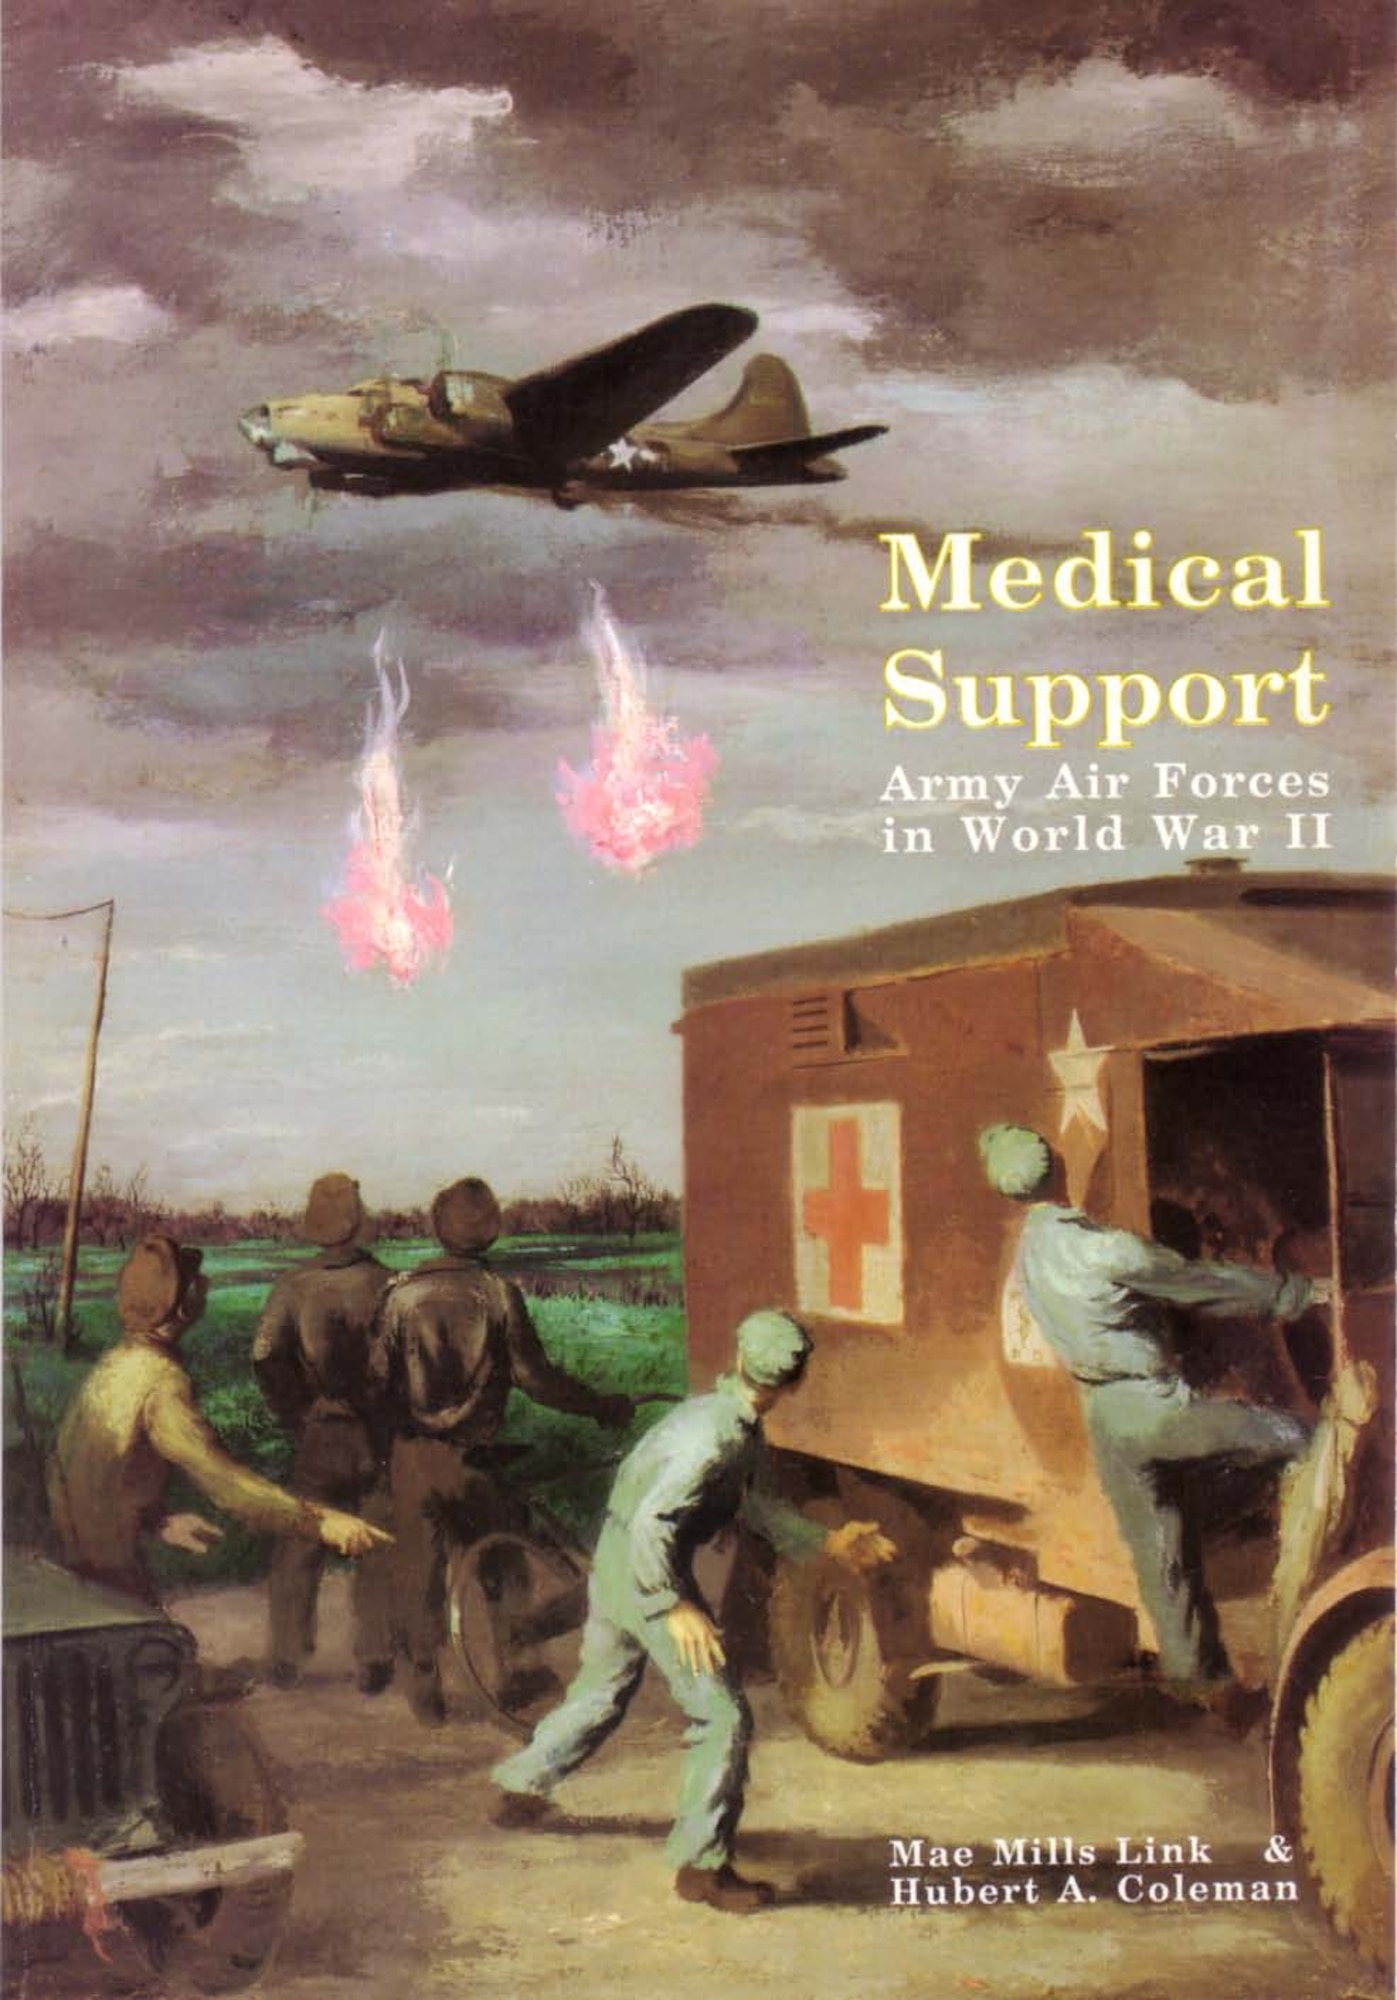 This book presents a narrative of the toatal performance of the AAF medical service in support of the Air Forces combat mission in WWII.